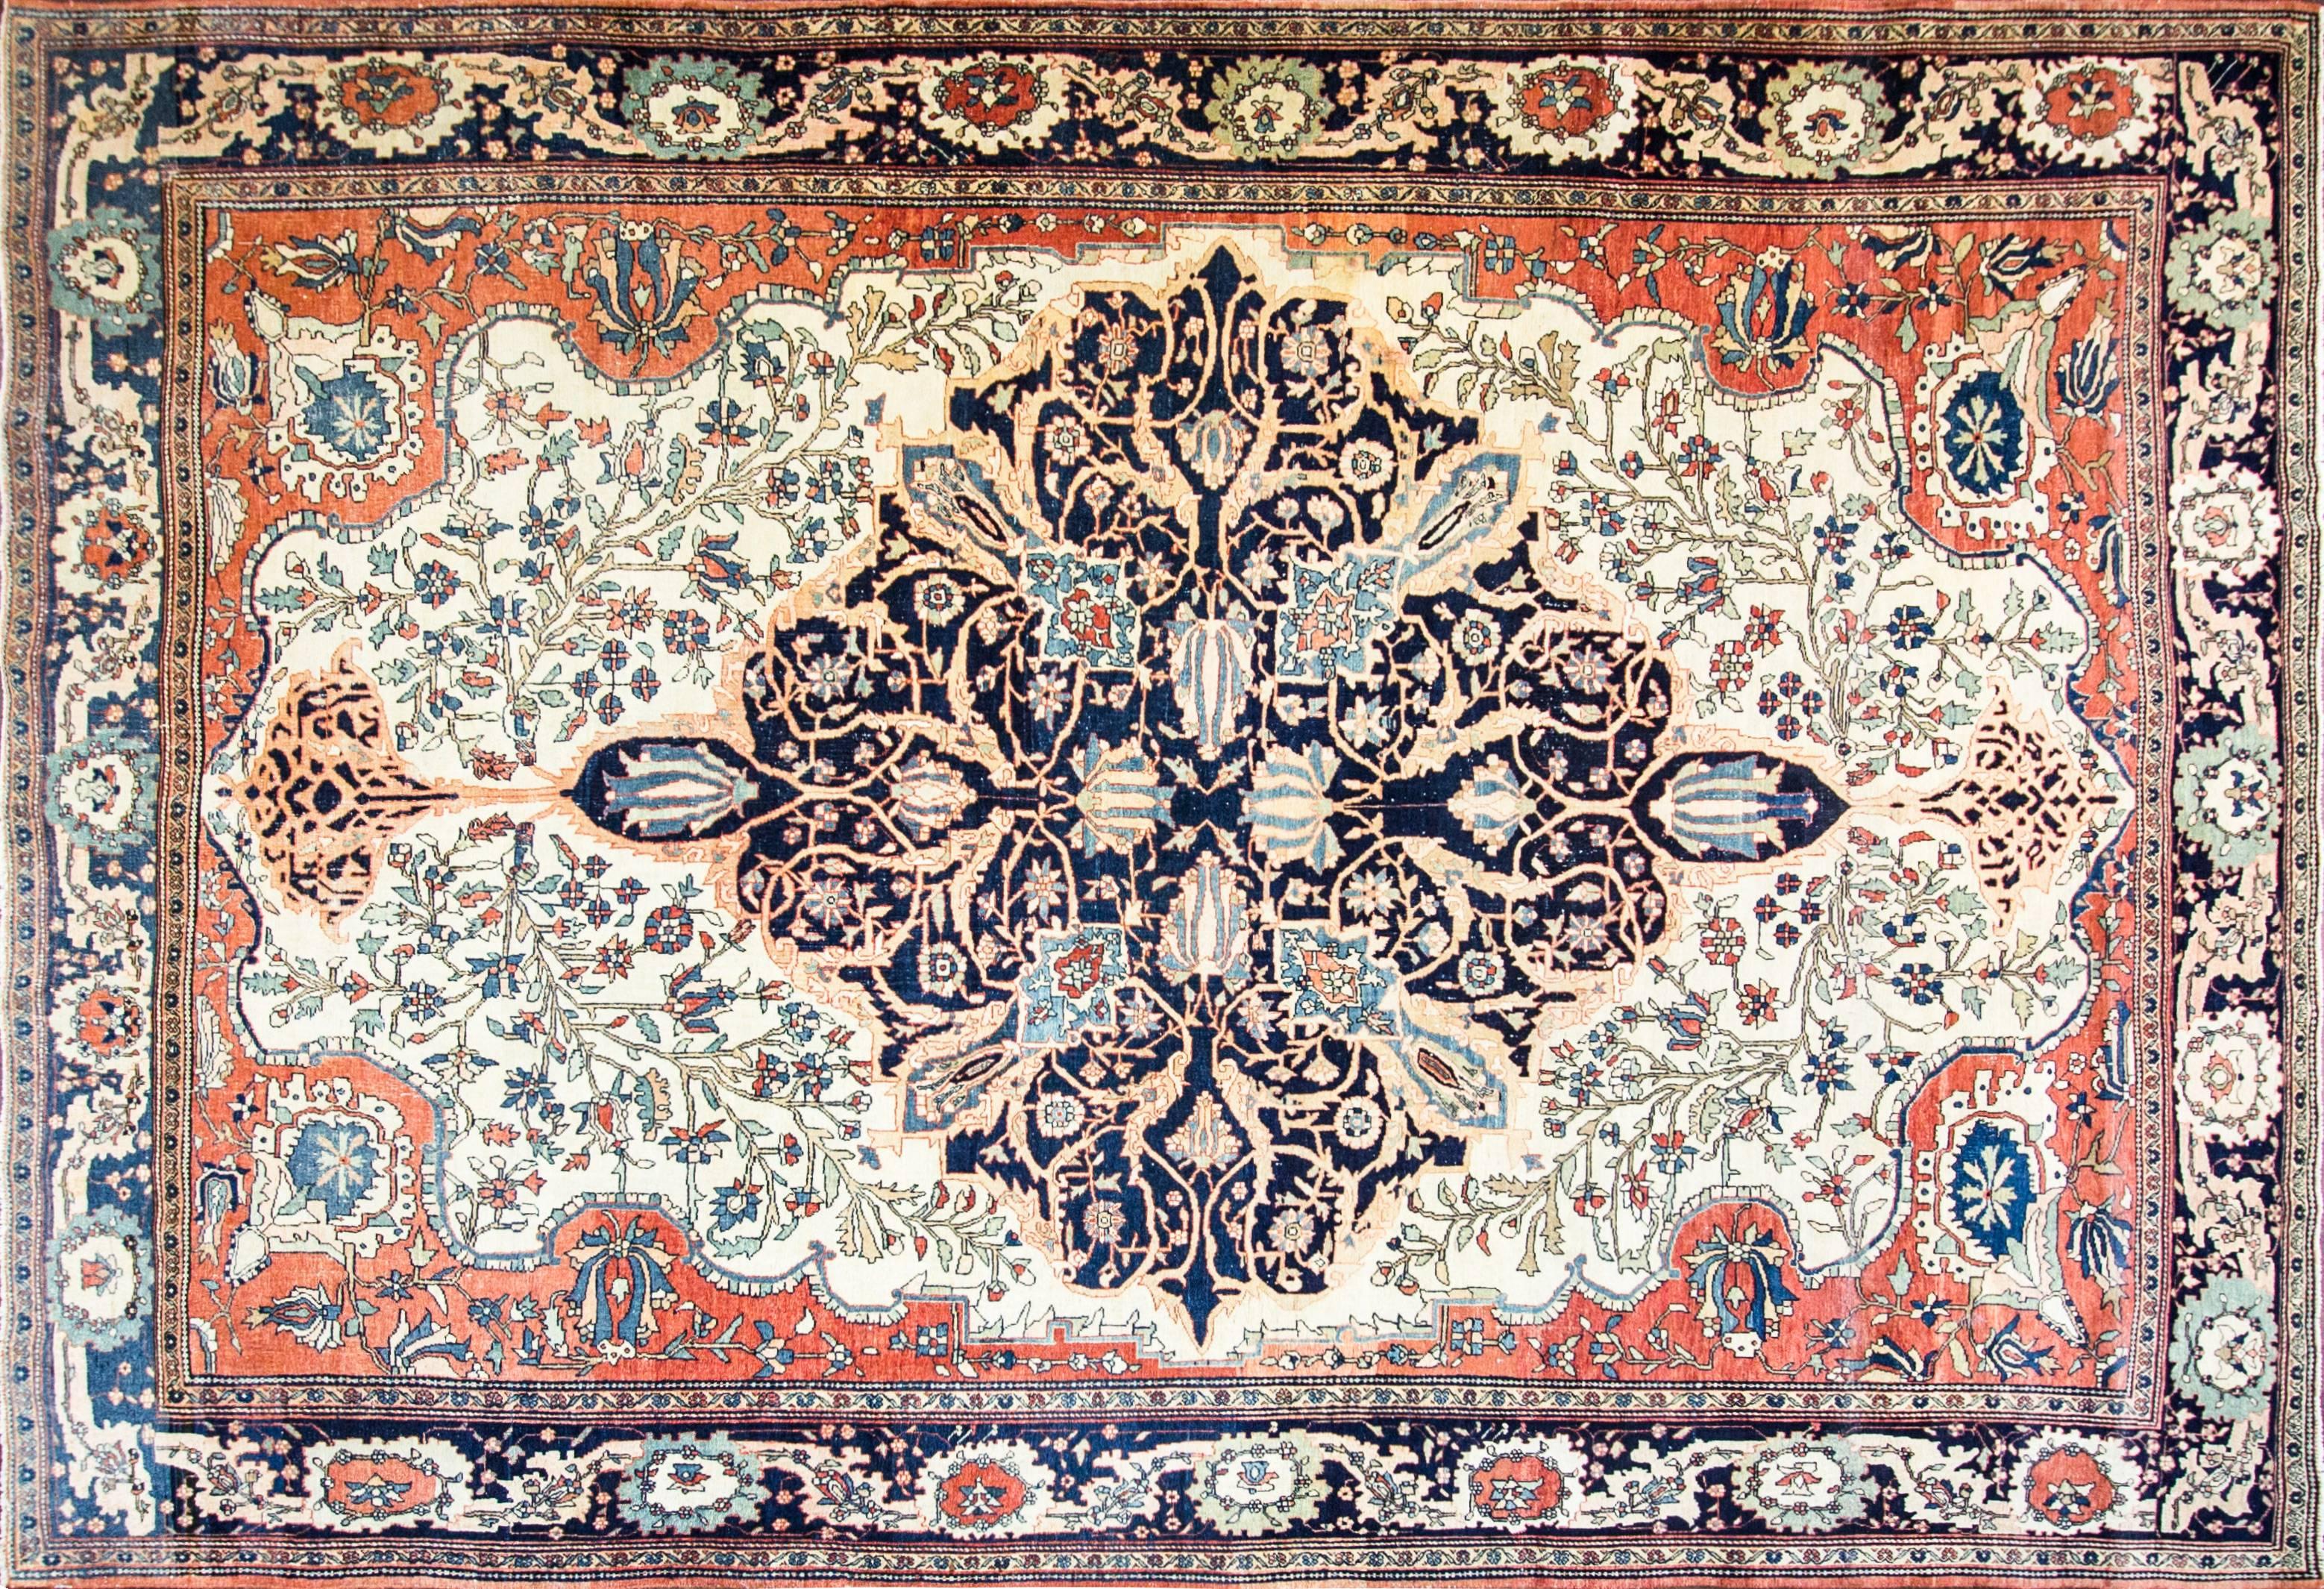 Feraghans were made between the 1870s and 1913 from a region north of the town of Arak, produced for the Persian aristocracy. They are single wefted, long and narrow or room-sized carpets, typically with an all-over Herati design or floral and